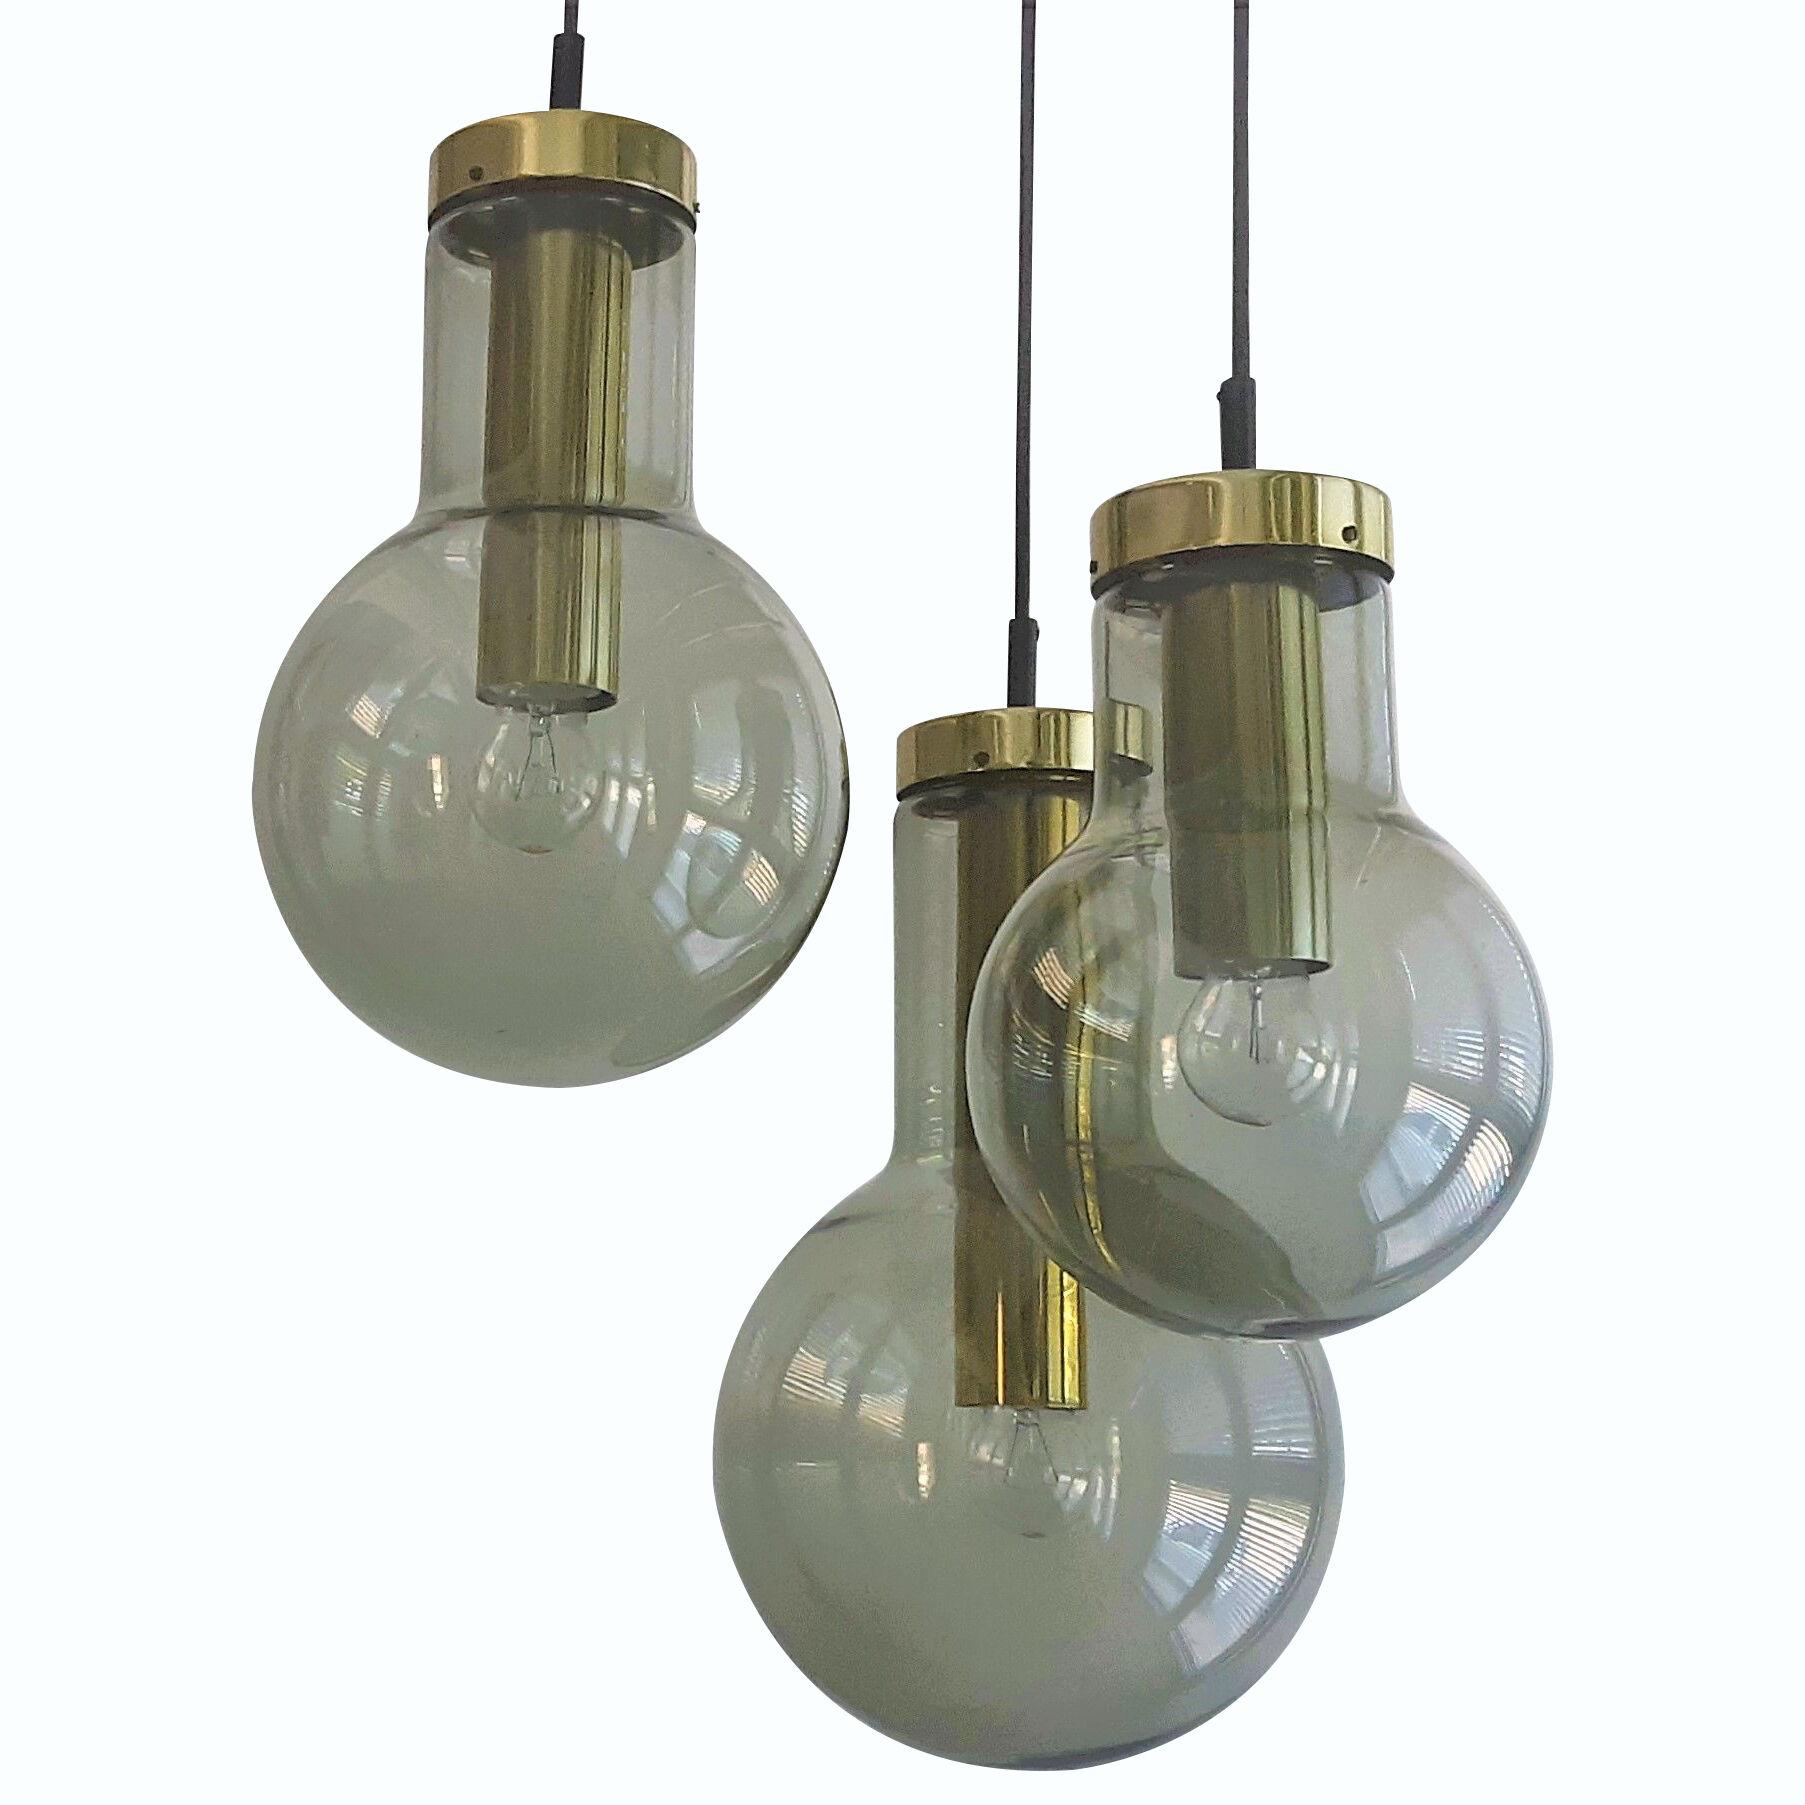 Chandelier of 3 'Maxi Globe' pendant lamps by Raak, The Netherlands 1960's